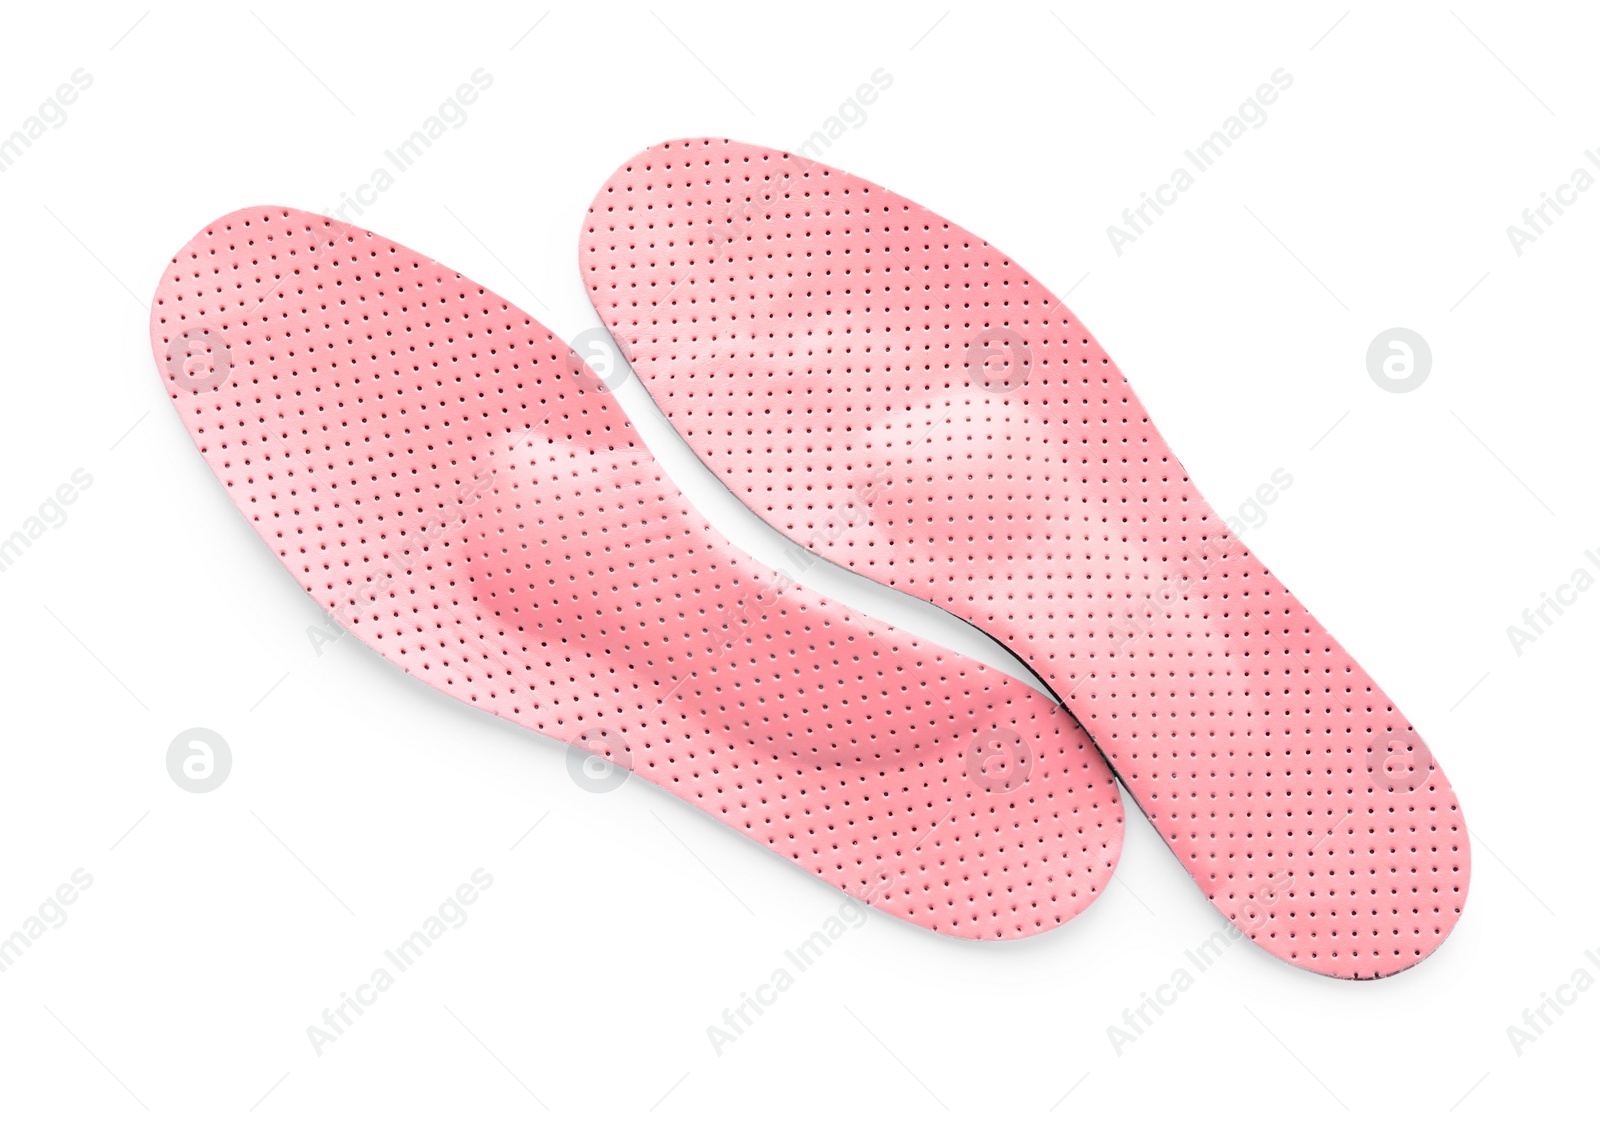 Image of Pink orthopedic insoles isolated on white, top view